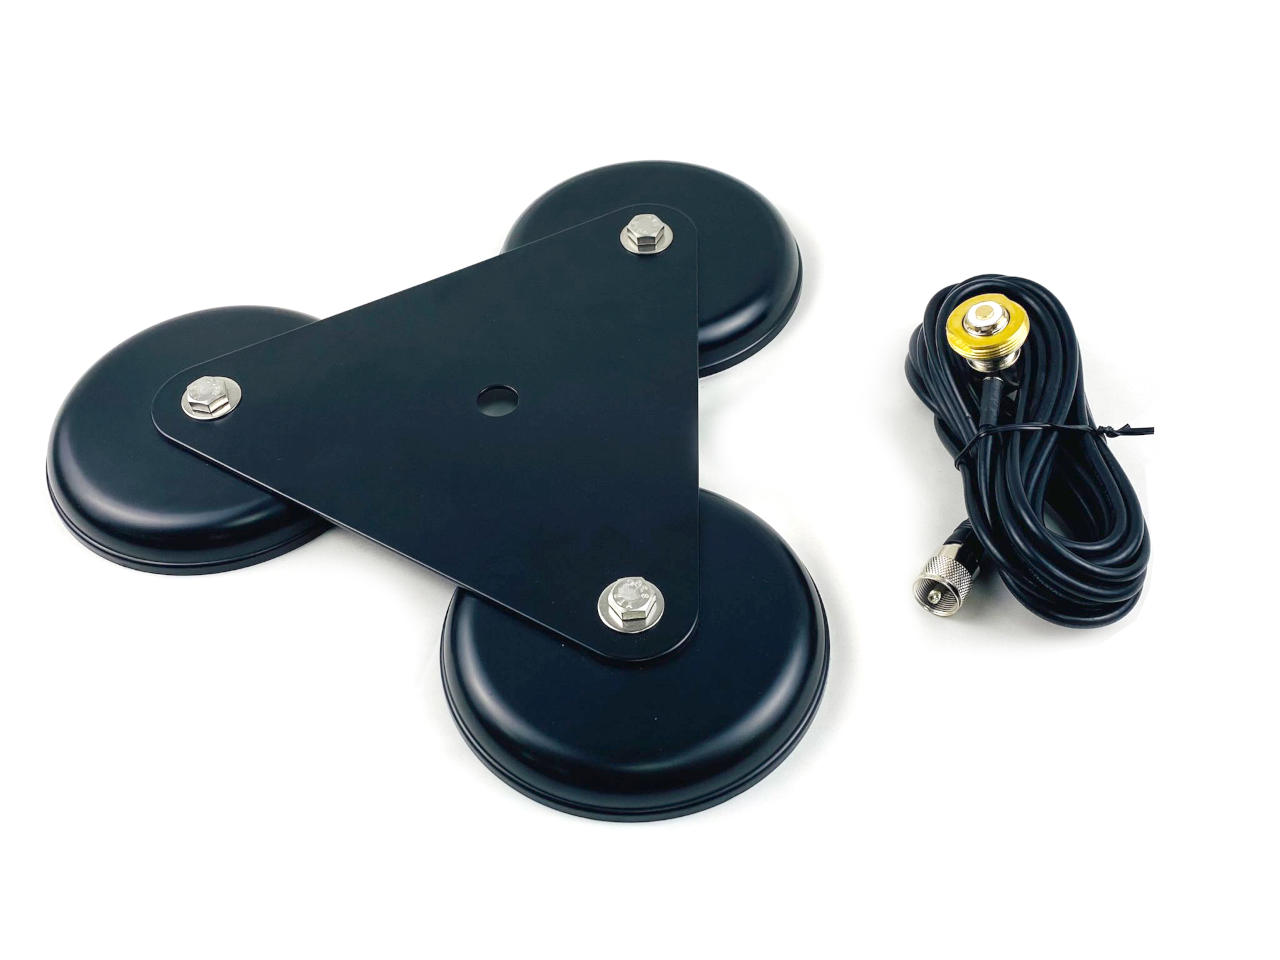 OPEK Mobile Antenna Trunk Mount - Two In One NMO UHF Connectors